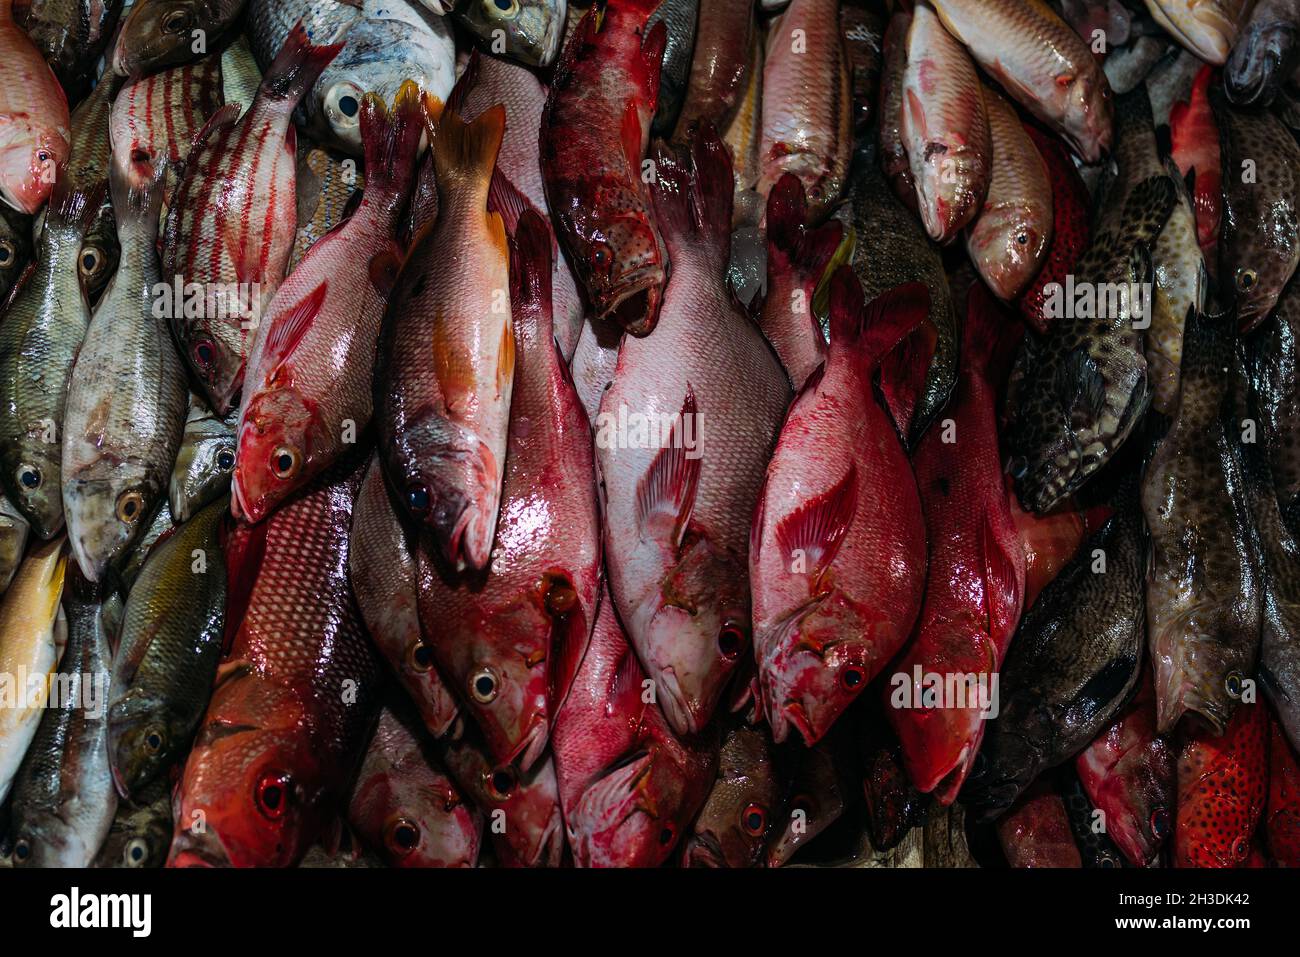 The market for marine fish. Street market. Sale of fresh fish. Freshly caught fish. Fish shop. Products for the restaurant. Fishery. Asian cuisine. Stock Photo